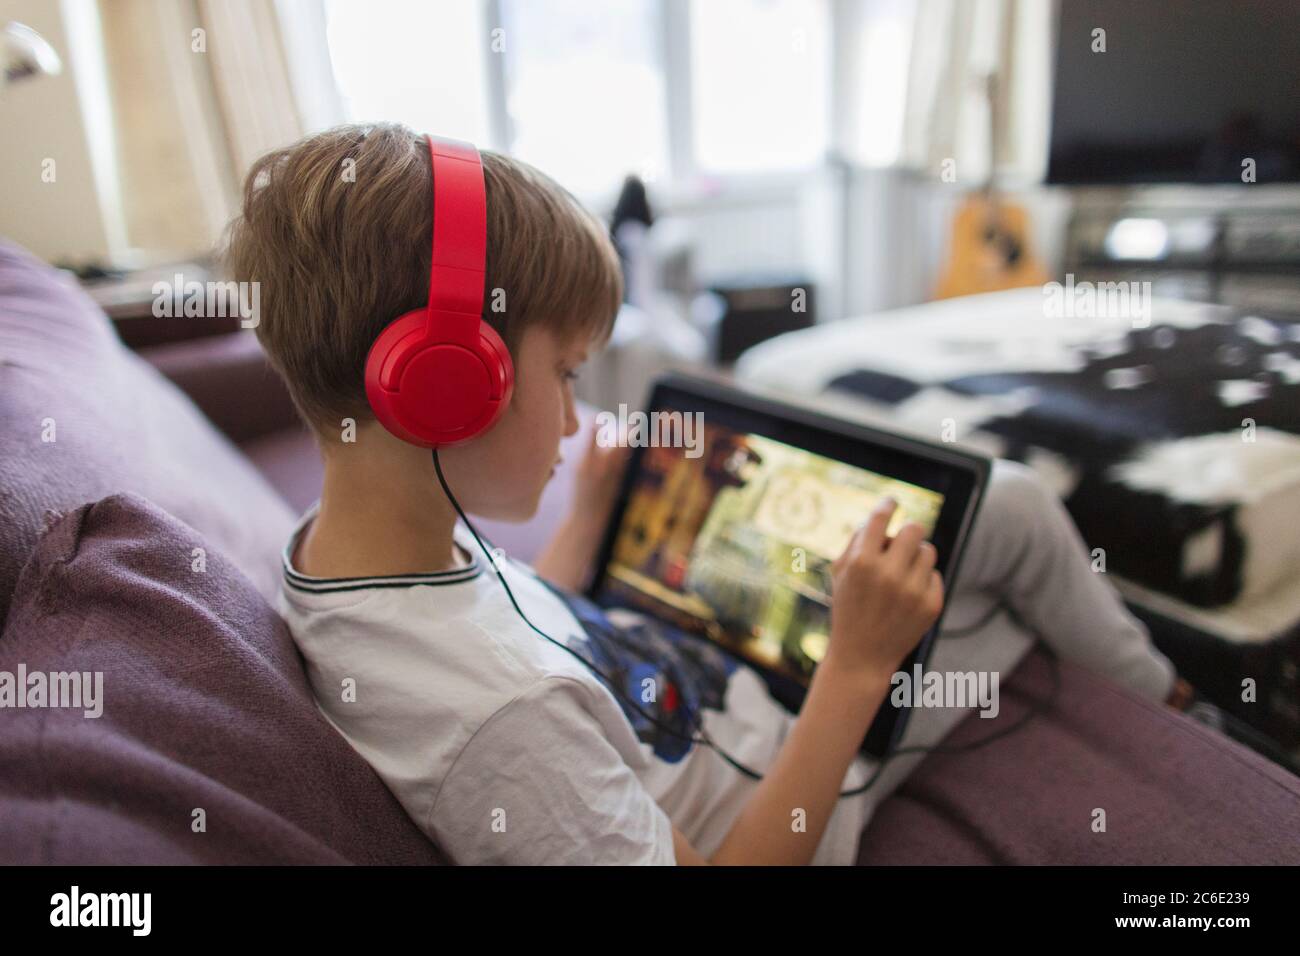 Boy with headphones and digital tablet playing video game on sofa Stock Photo